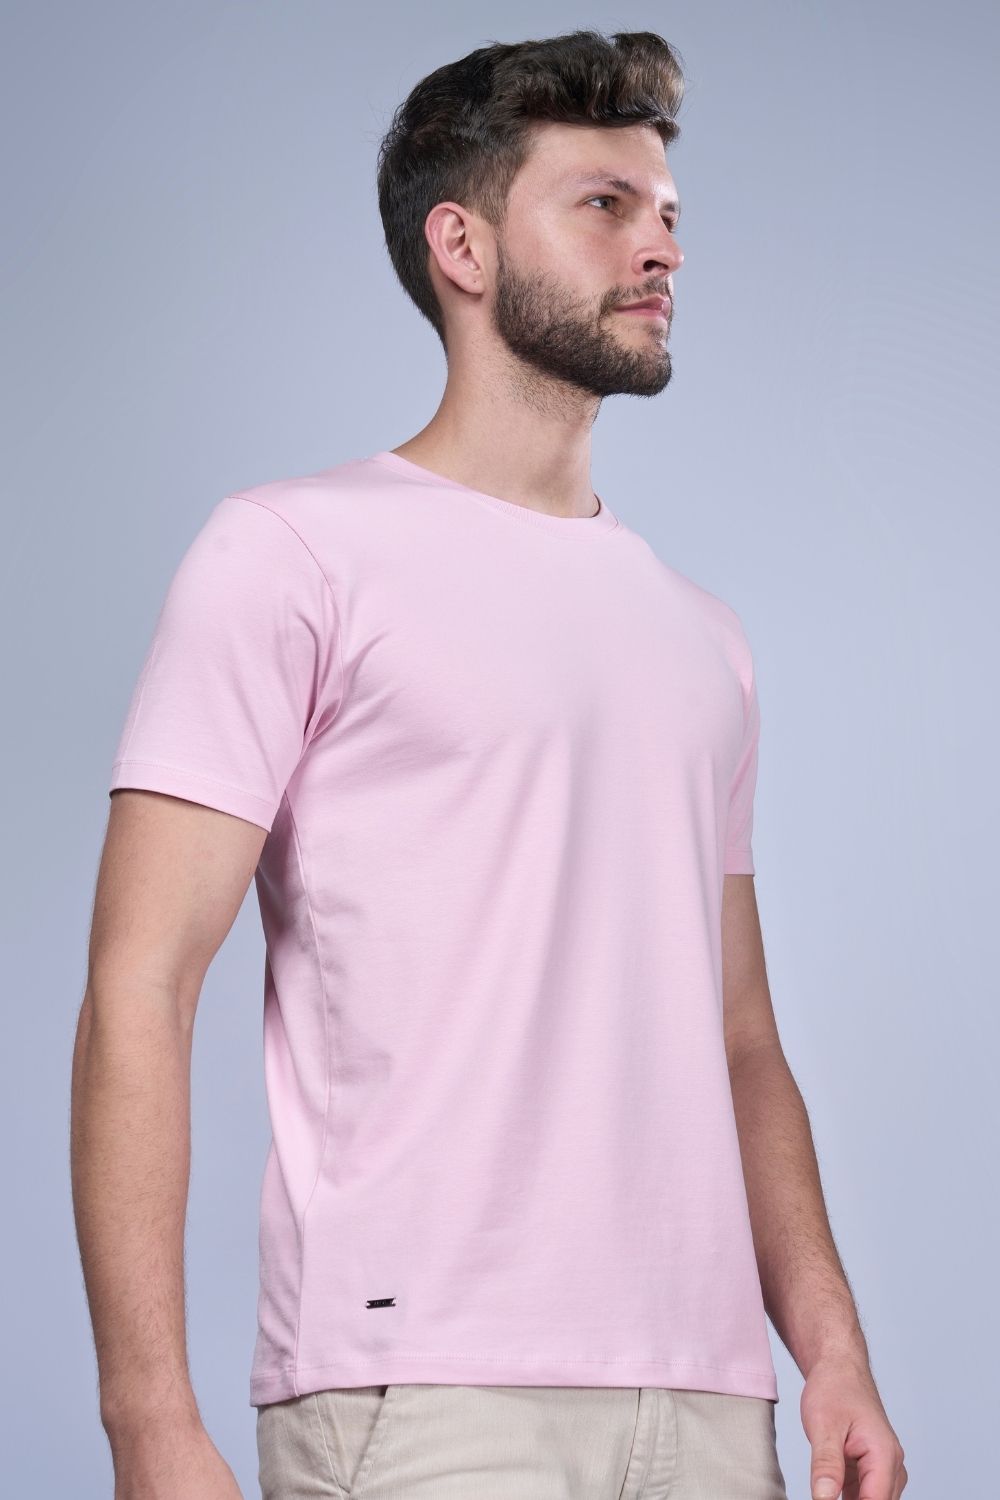 A model wearing Cotton Stretch T shirt for men in the solid color lilac shade with half sleeves and round neck.